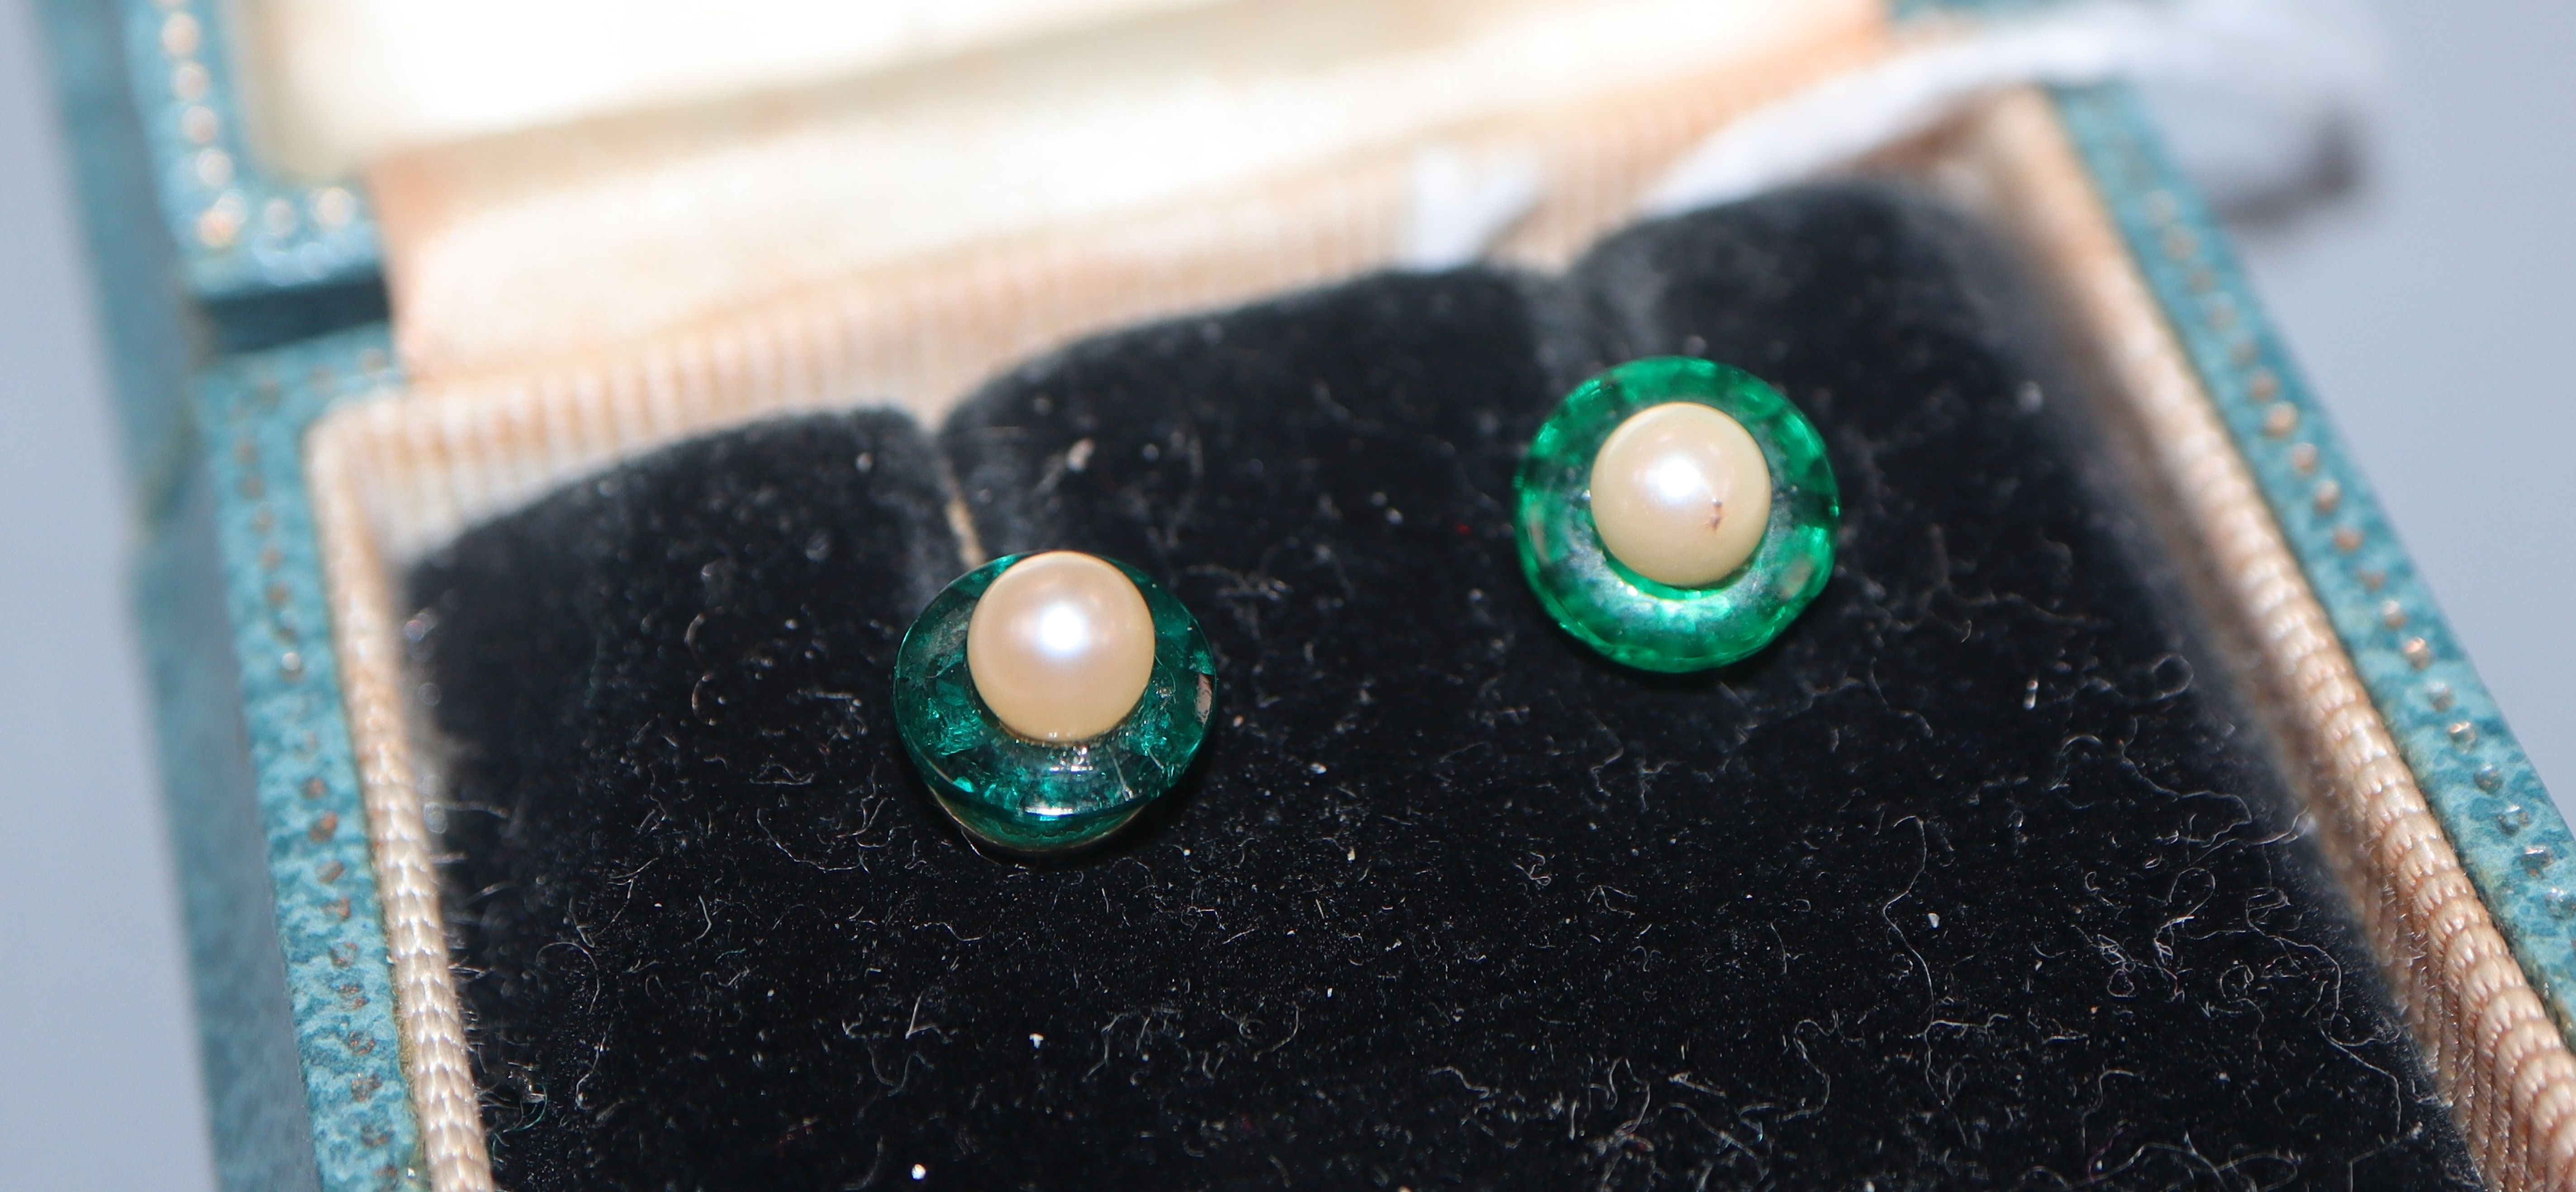 A cased pair of cultured pearl pearl and green paste? ear studs.